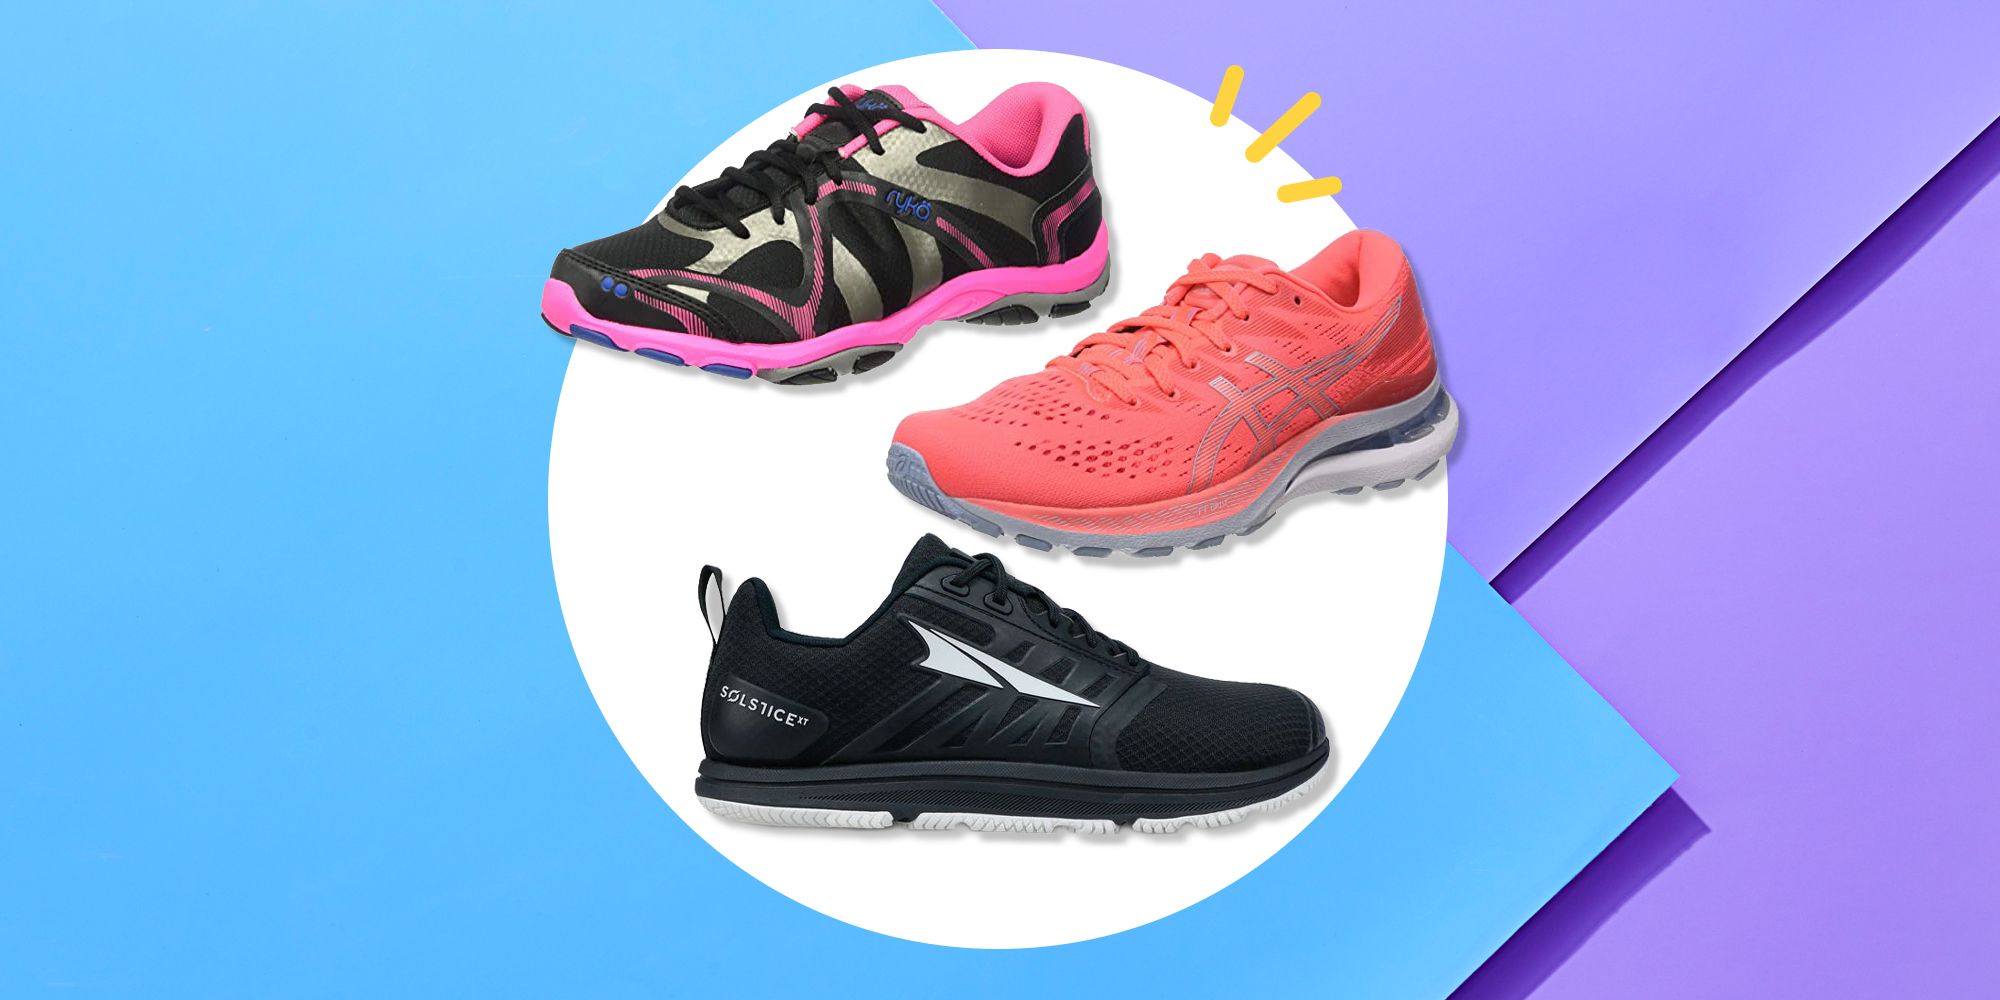 WOMENS LADIES LACE UP TRAINERS PUMPS SHOES SIZE GYM RUNNING SPORTS SNEAKERS NEW 